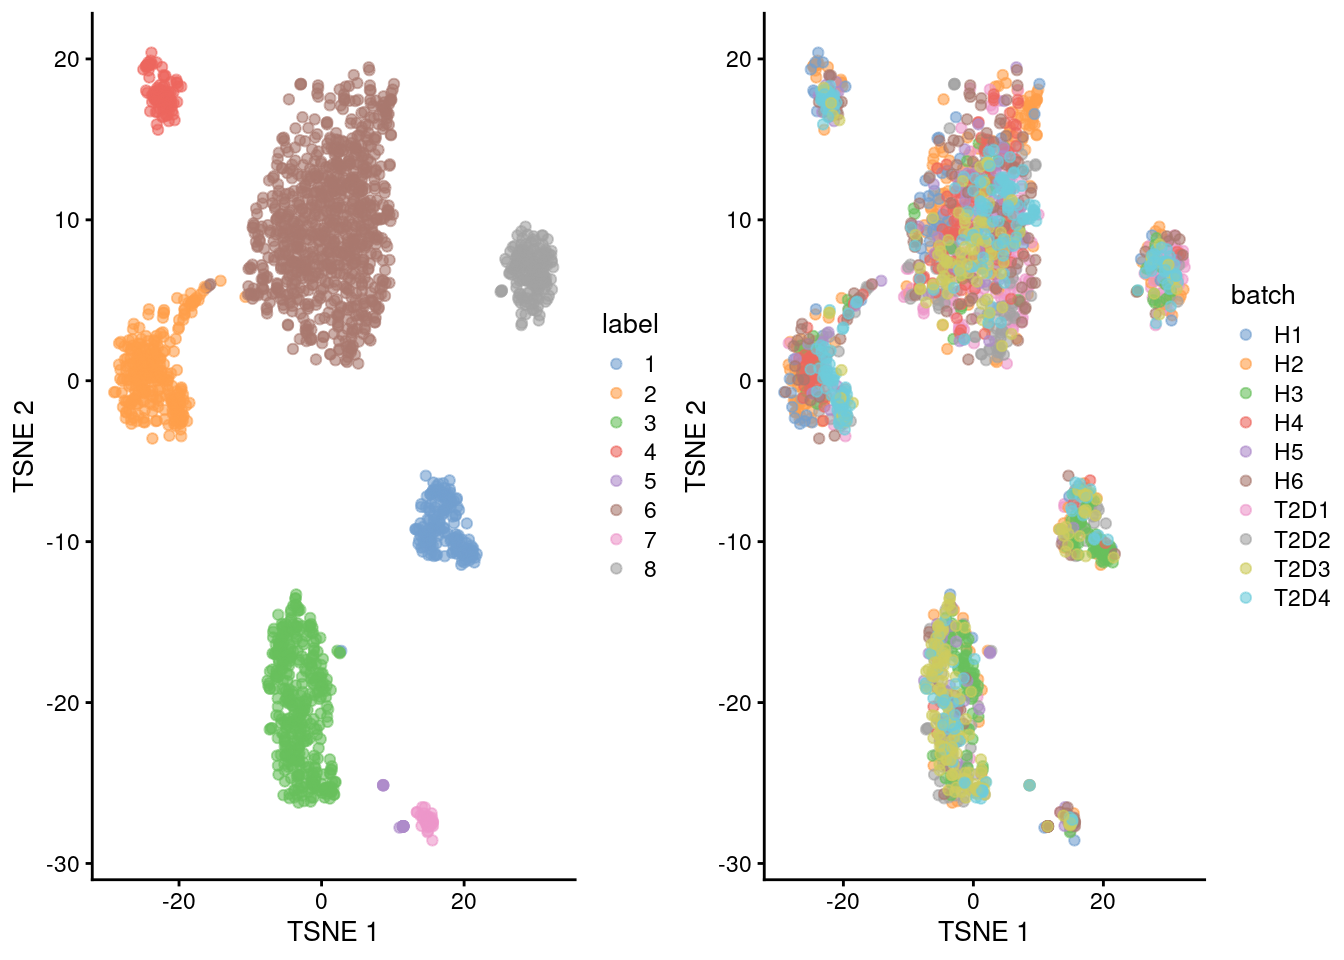 Yet another $t$-SNE plot of the Segerstolpe dataset, this time after batch correction across donors. Each point represents a cell and is colored by the assigned cluster identity.